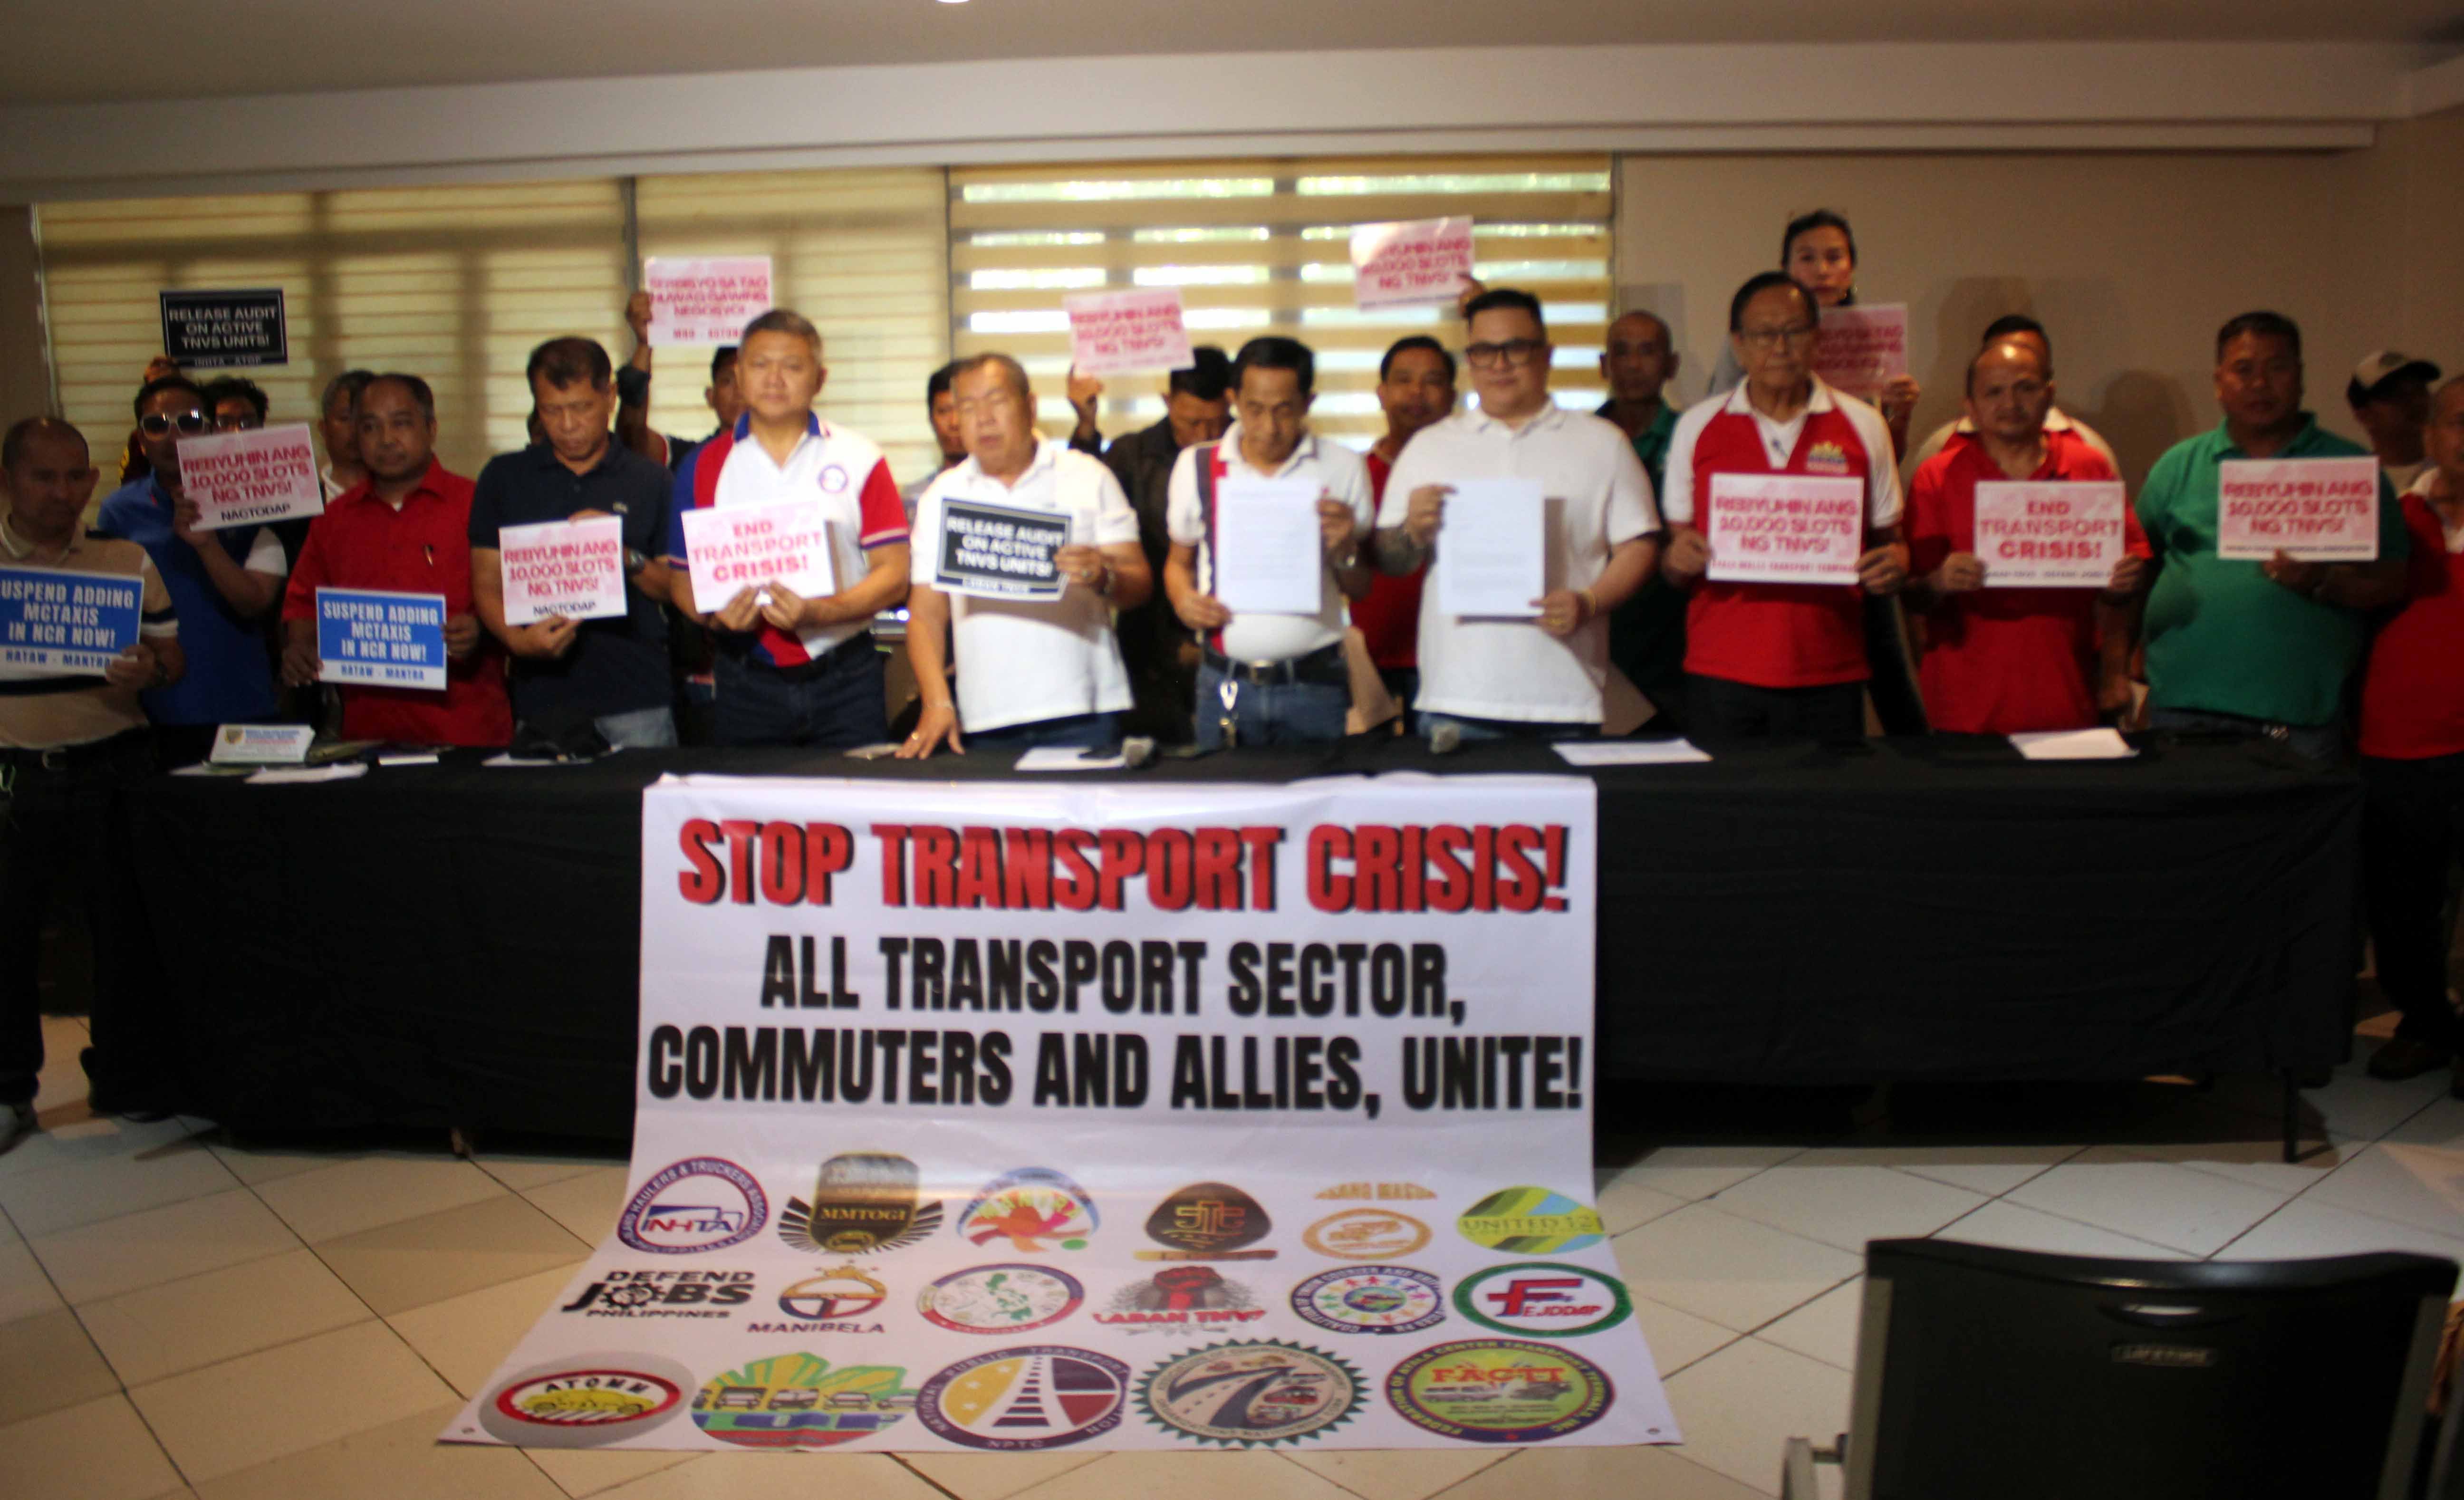 TRANSPORT GROUPS UNITED VS. MOTORCYCLE TAXIS